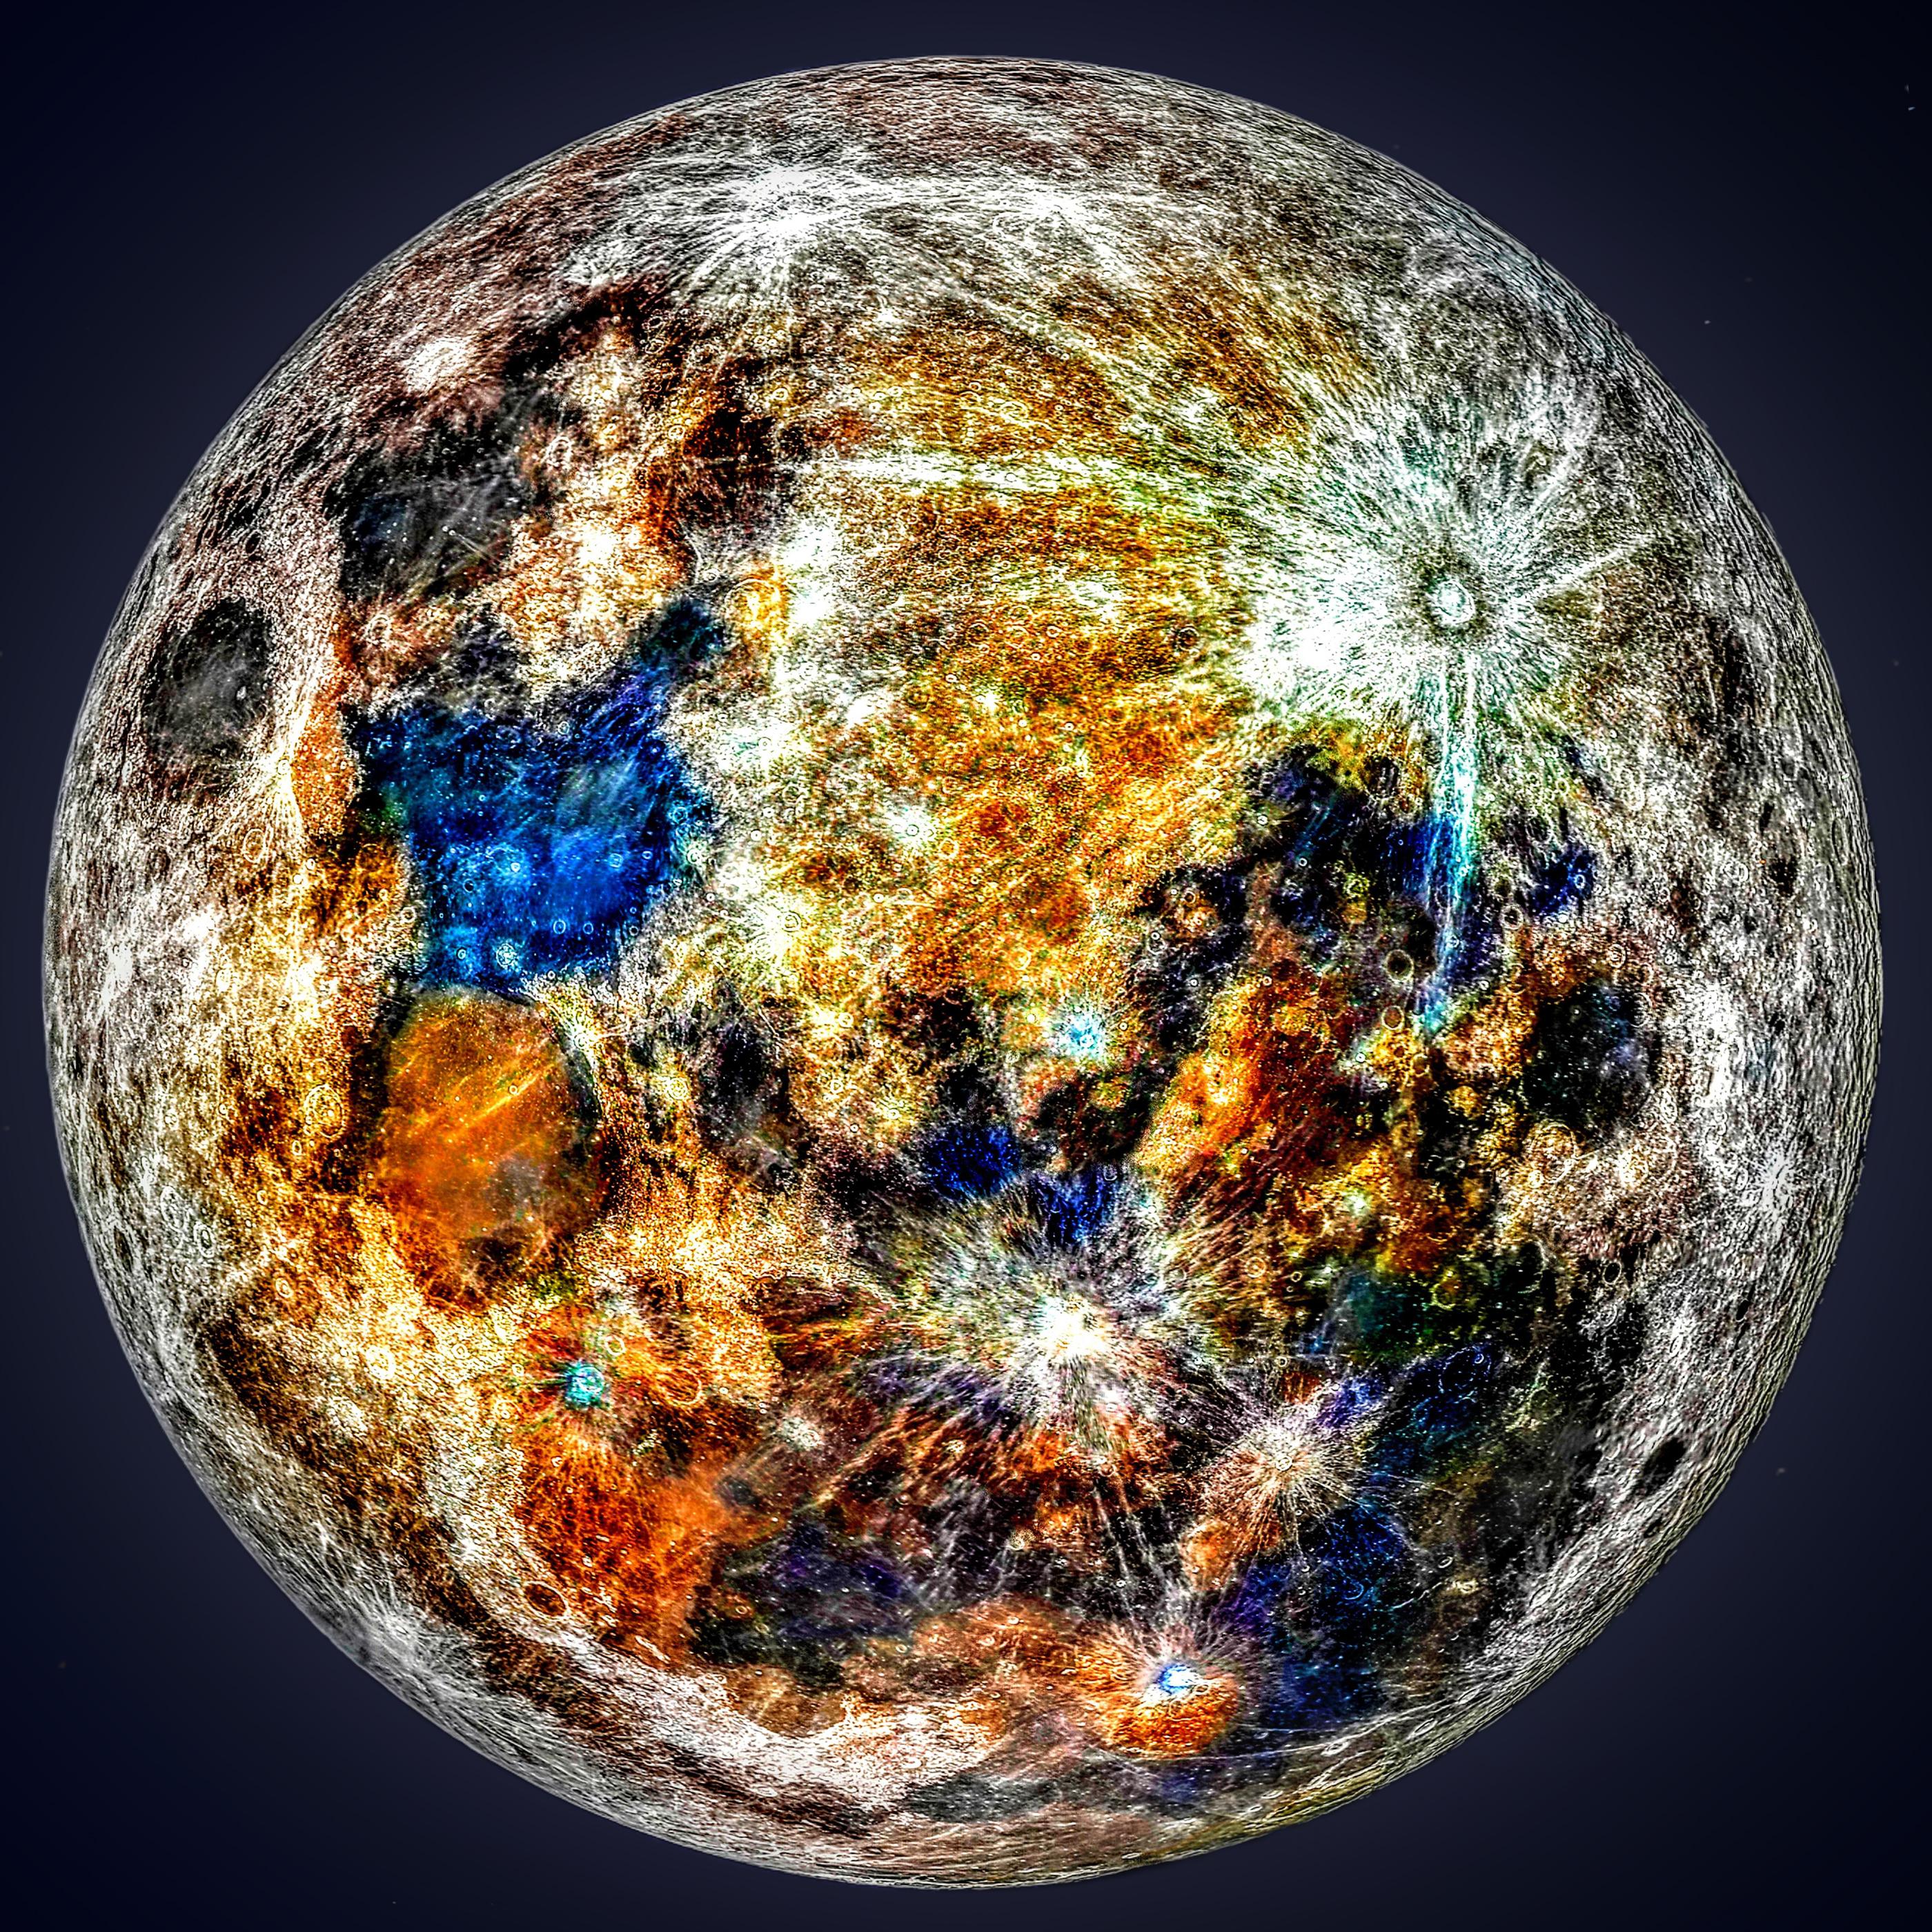 I extracted the color data from 150k image of the moon so you can